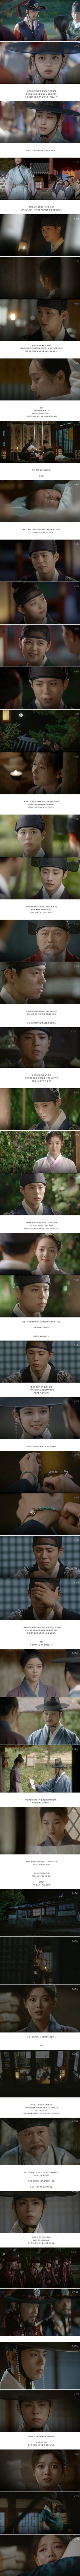 episode 14 captures for the Korean drama 'Moonlight Drawn by Clouds'